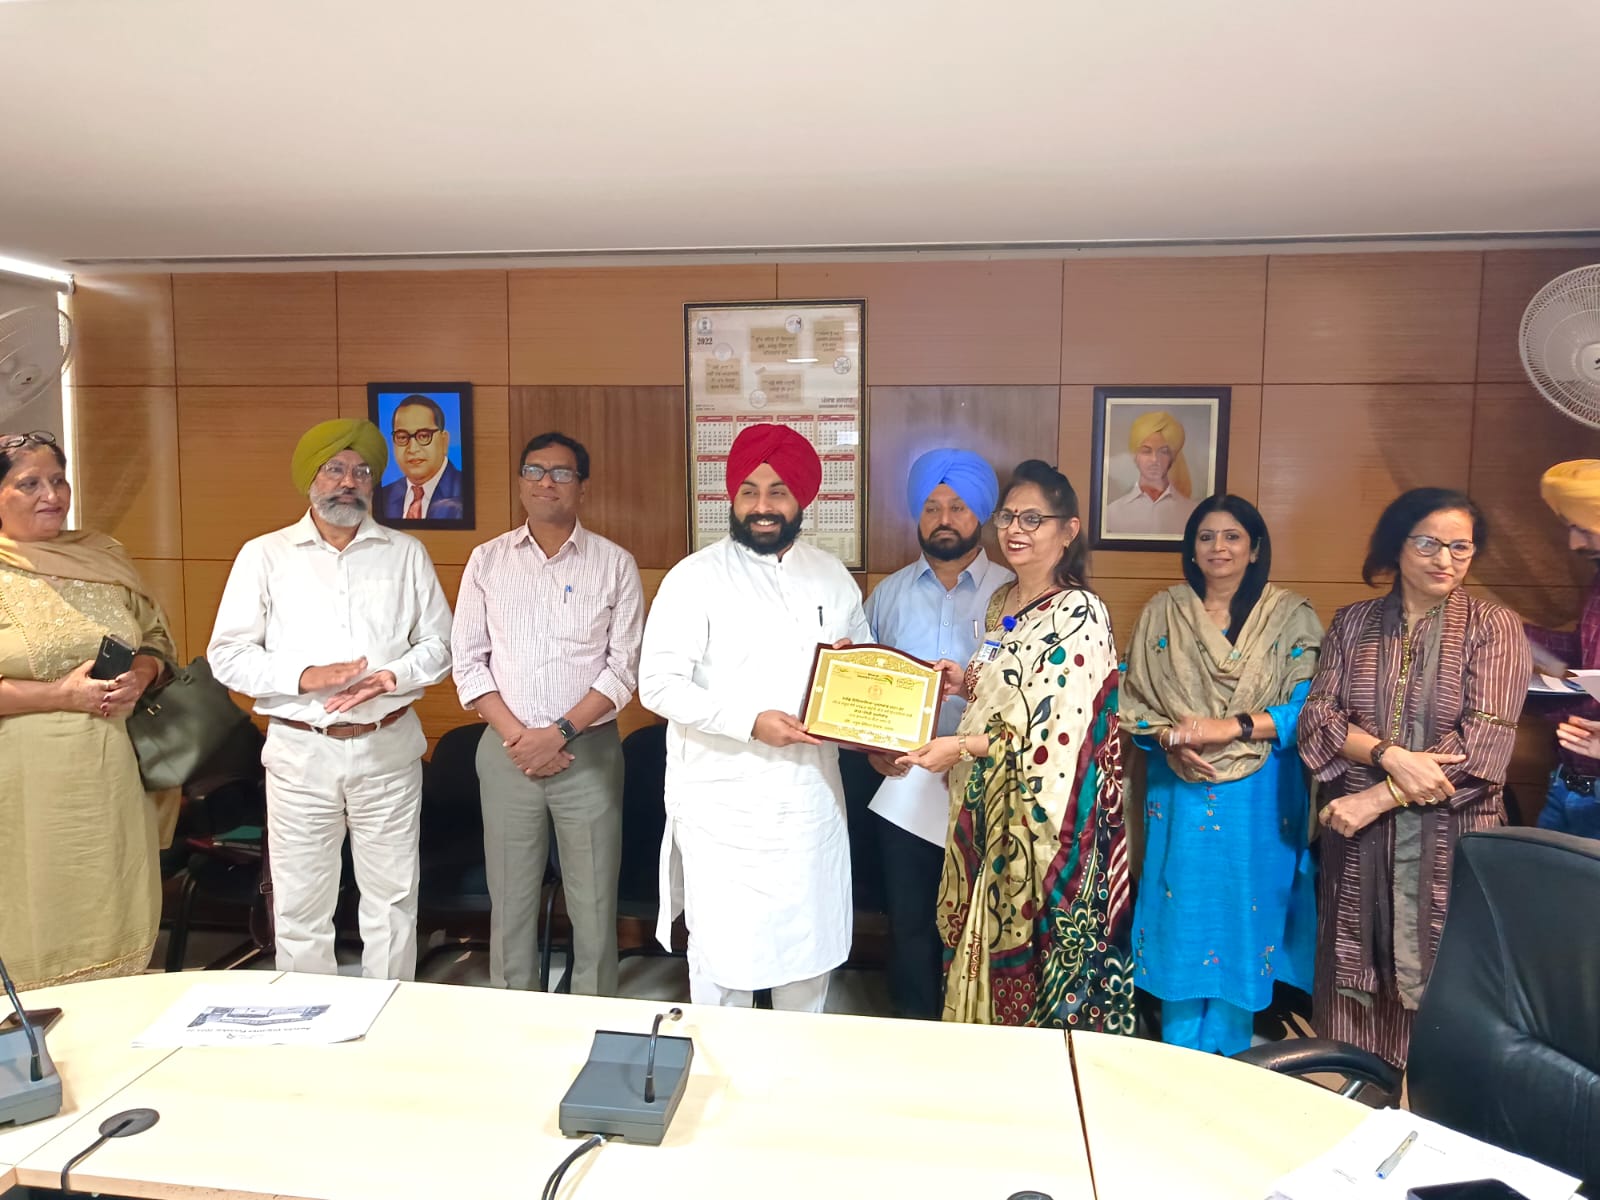 BVM kitchlu  Nagar attained State Level Overall Swatchhta Puruskar from  Honorable Education Minister Punjab, Mr Harjot Singh Bains